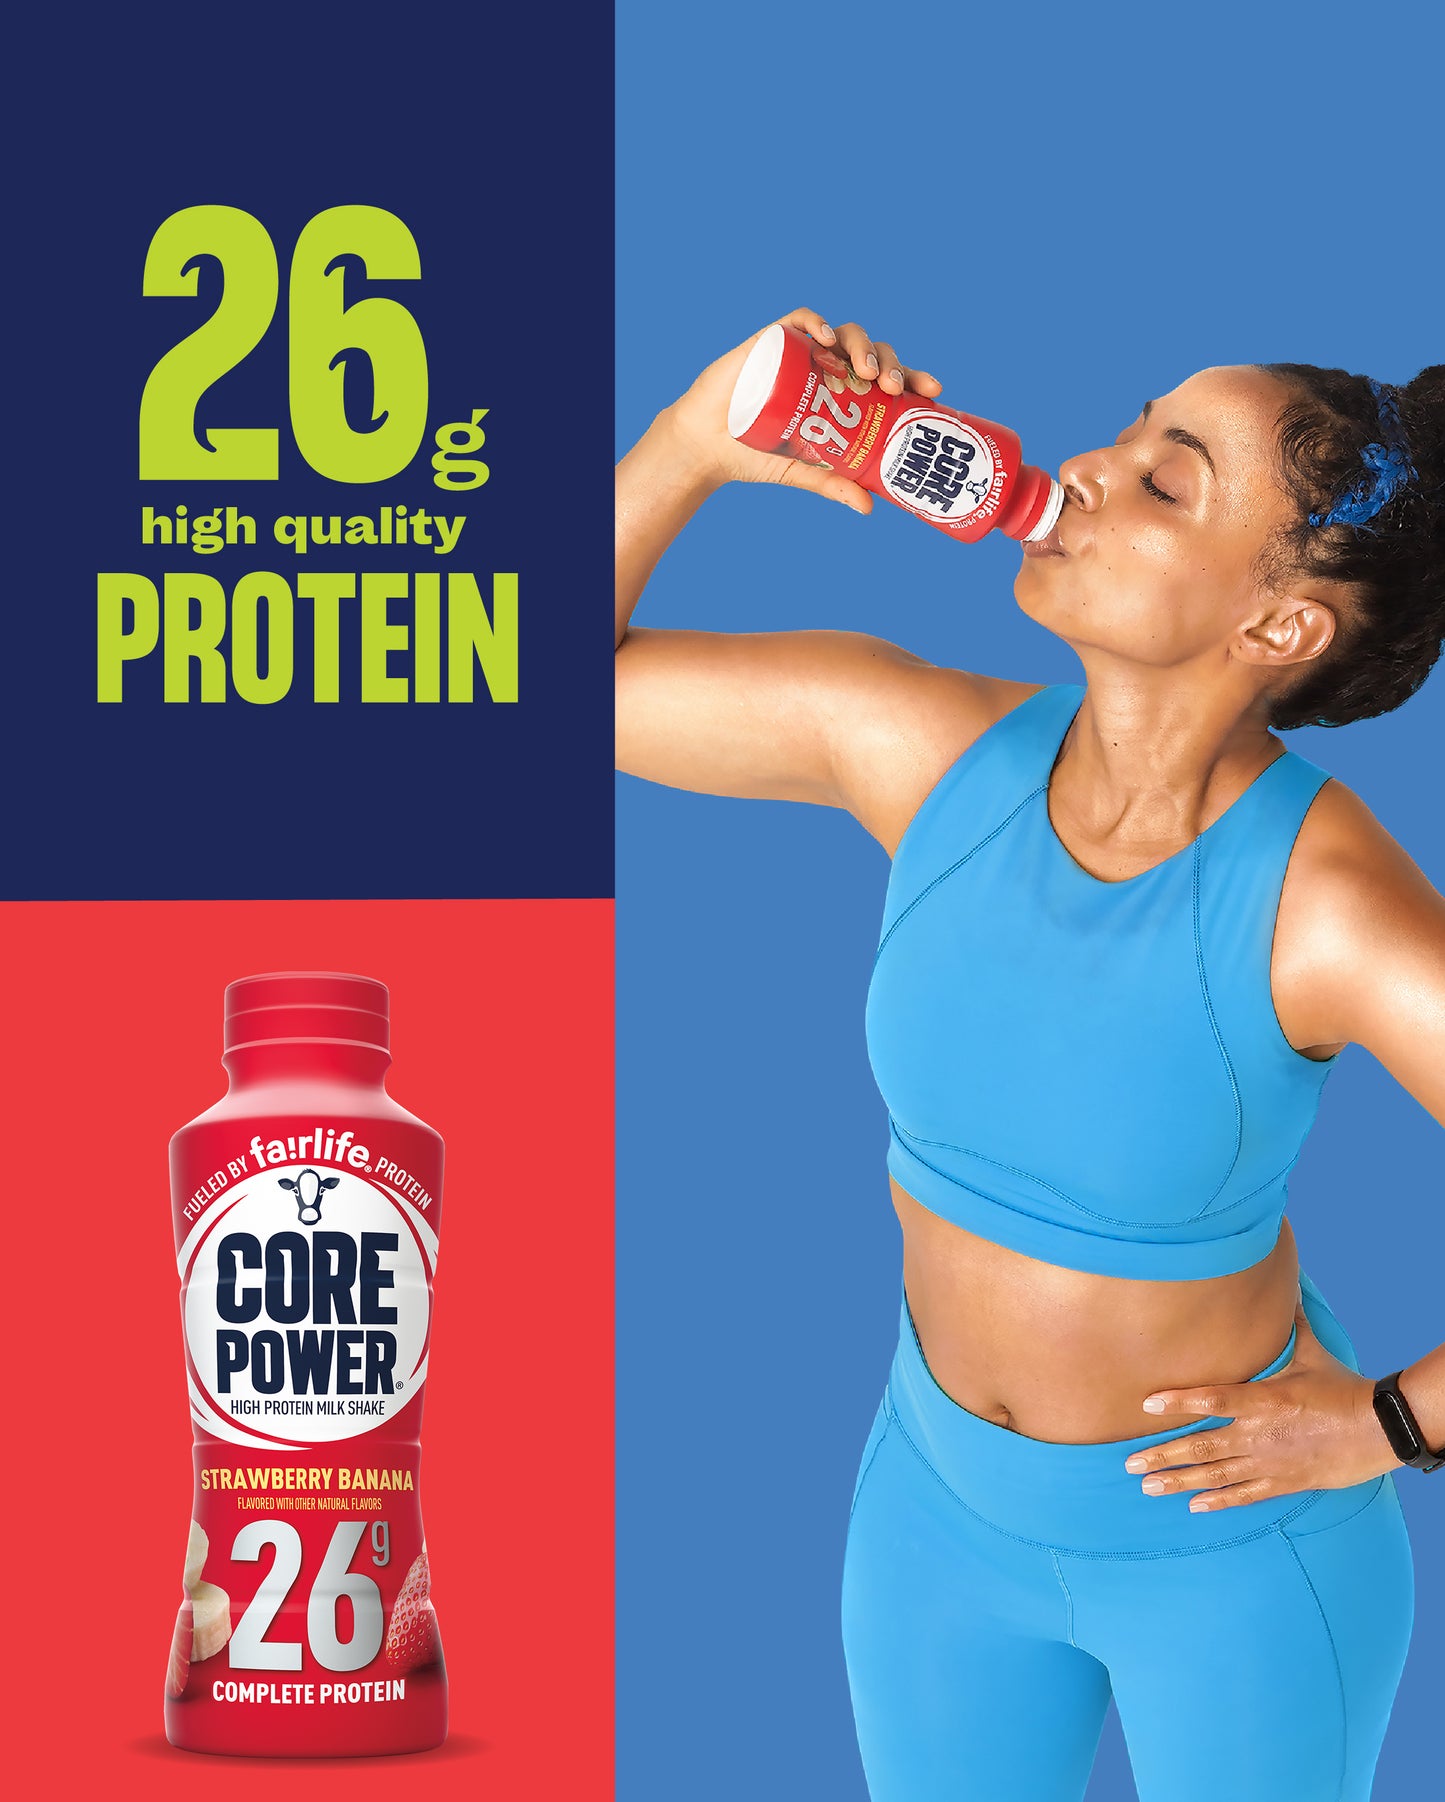 fairlife Core Power 26g high quality protein shake 14 fl oz (pack of 12); Strawberry Banana